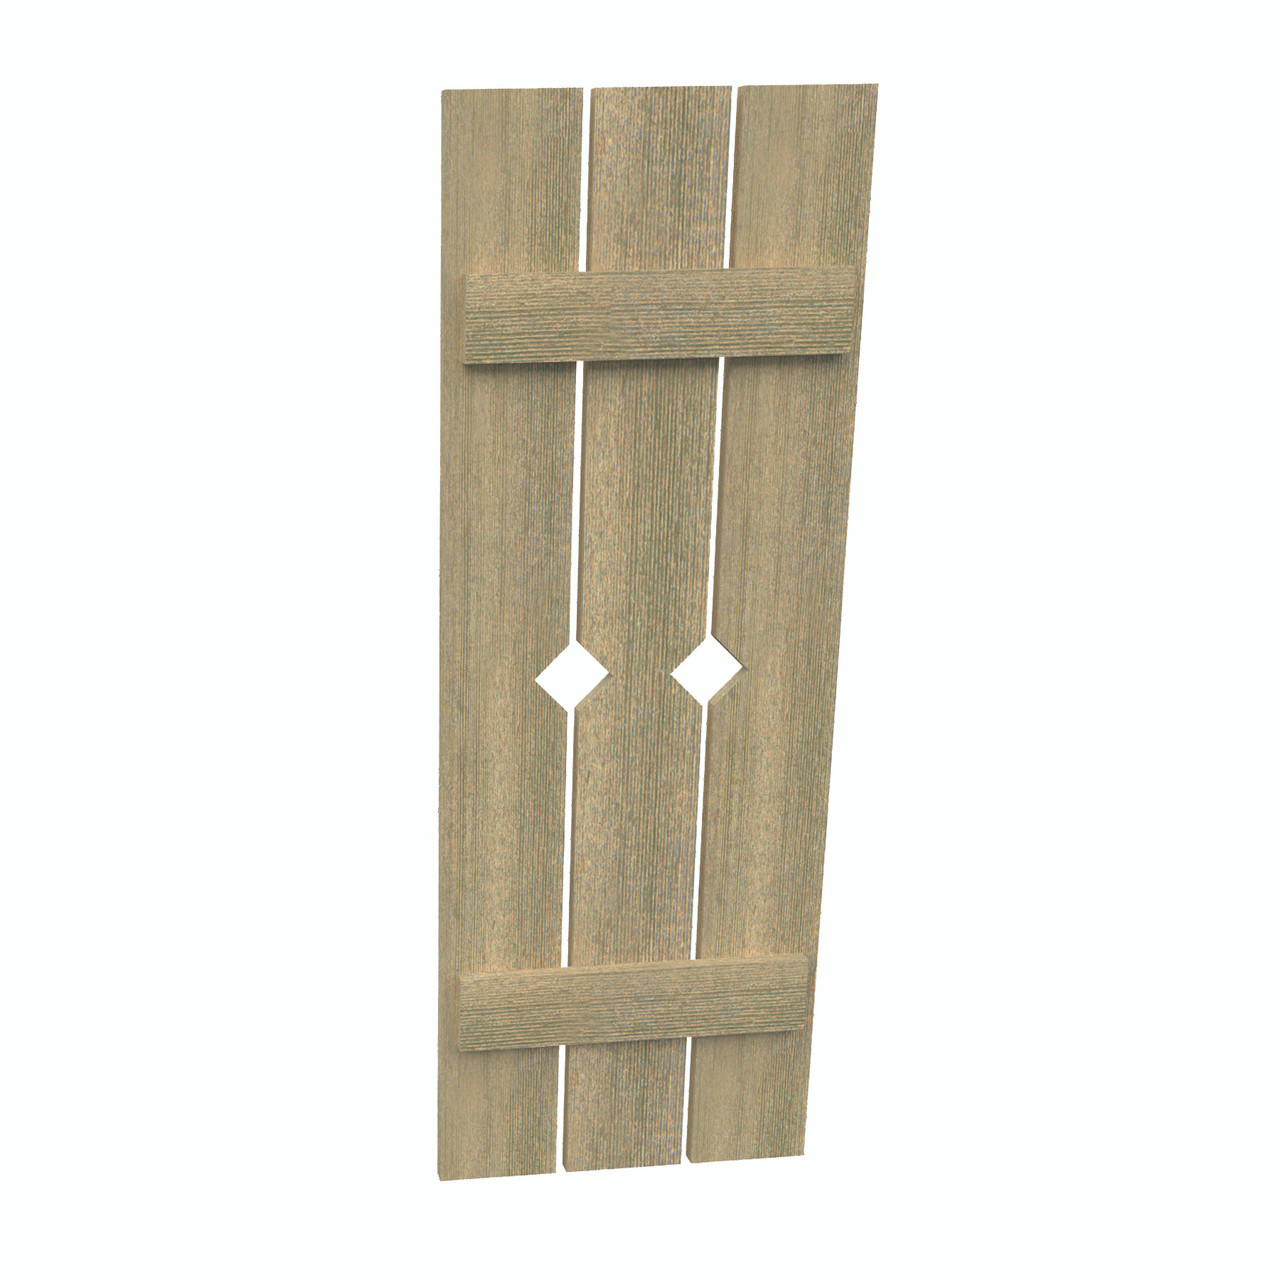 18 inch by 33 inch Plank Shutter with 3-Plank, Diamond